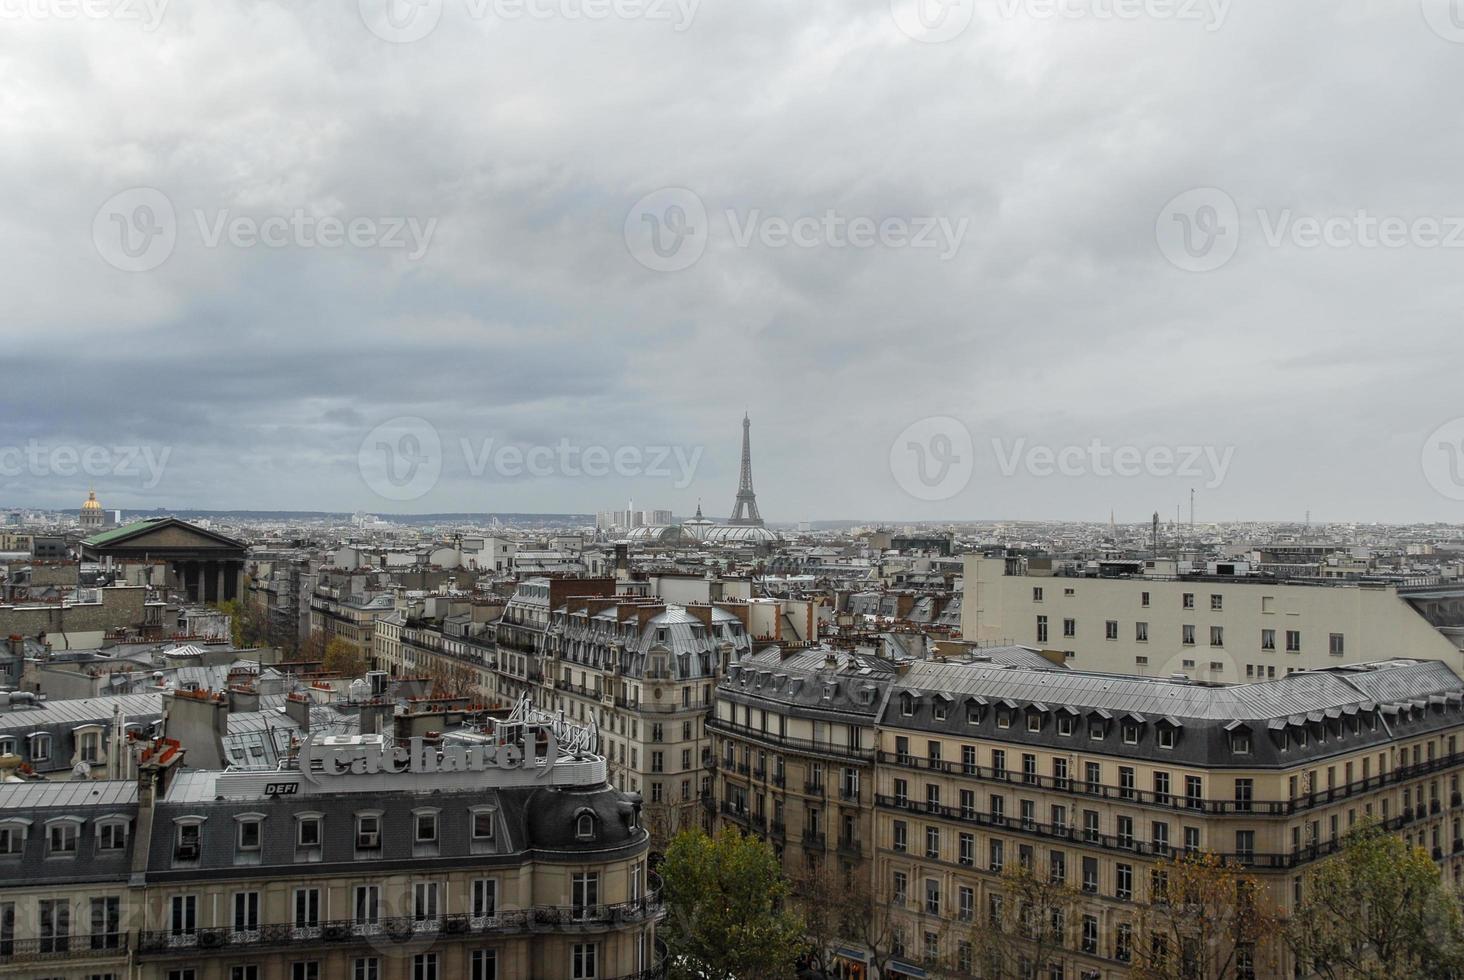 Paris rooftops and skyline on a cloudy afternoon in France. Paris is one of the top tourist destinations in Europe. photo